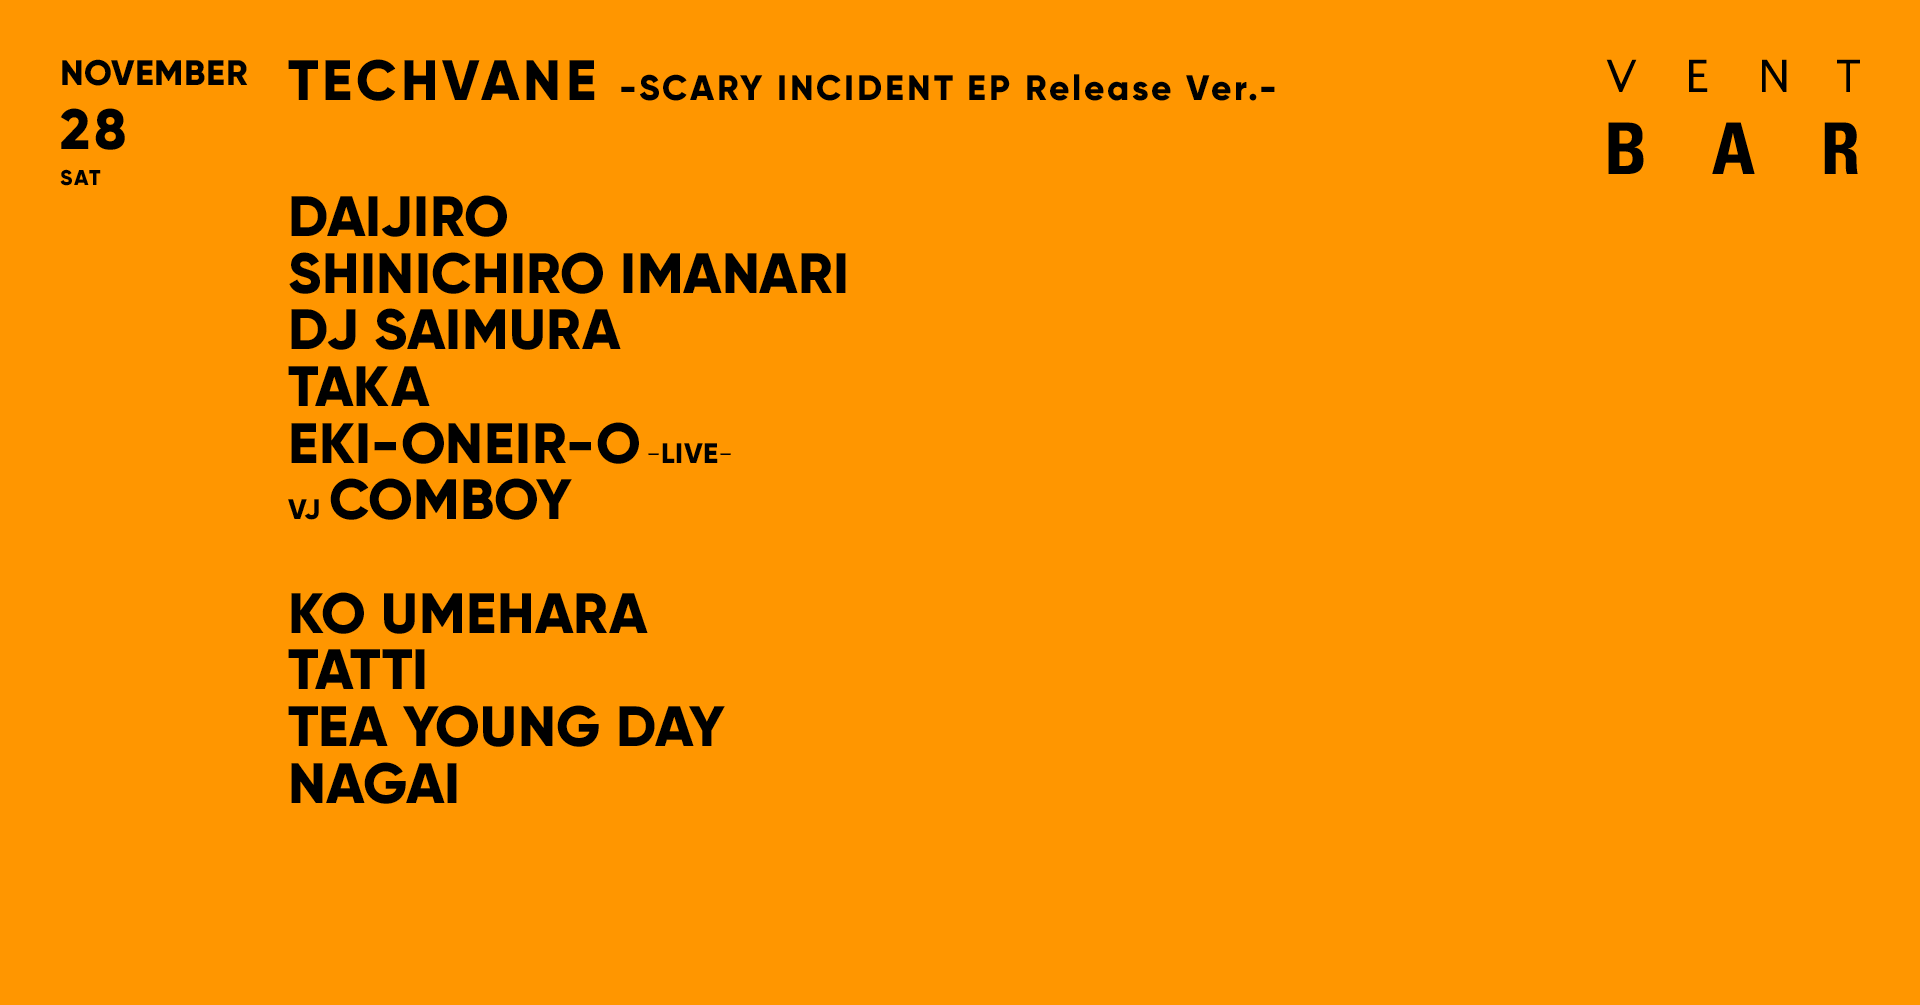 TECHVANE “SCARY INCIDENT EP release Ver.” / VENT BAR